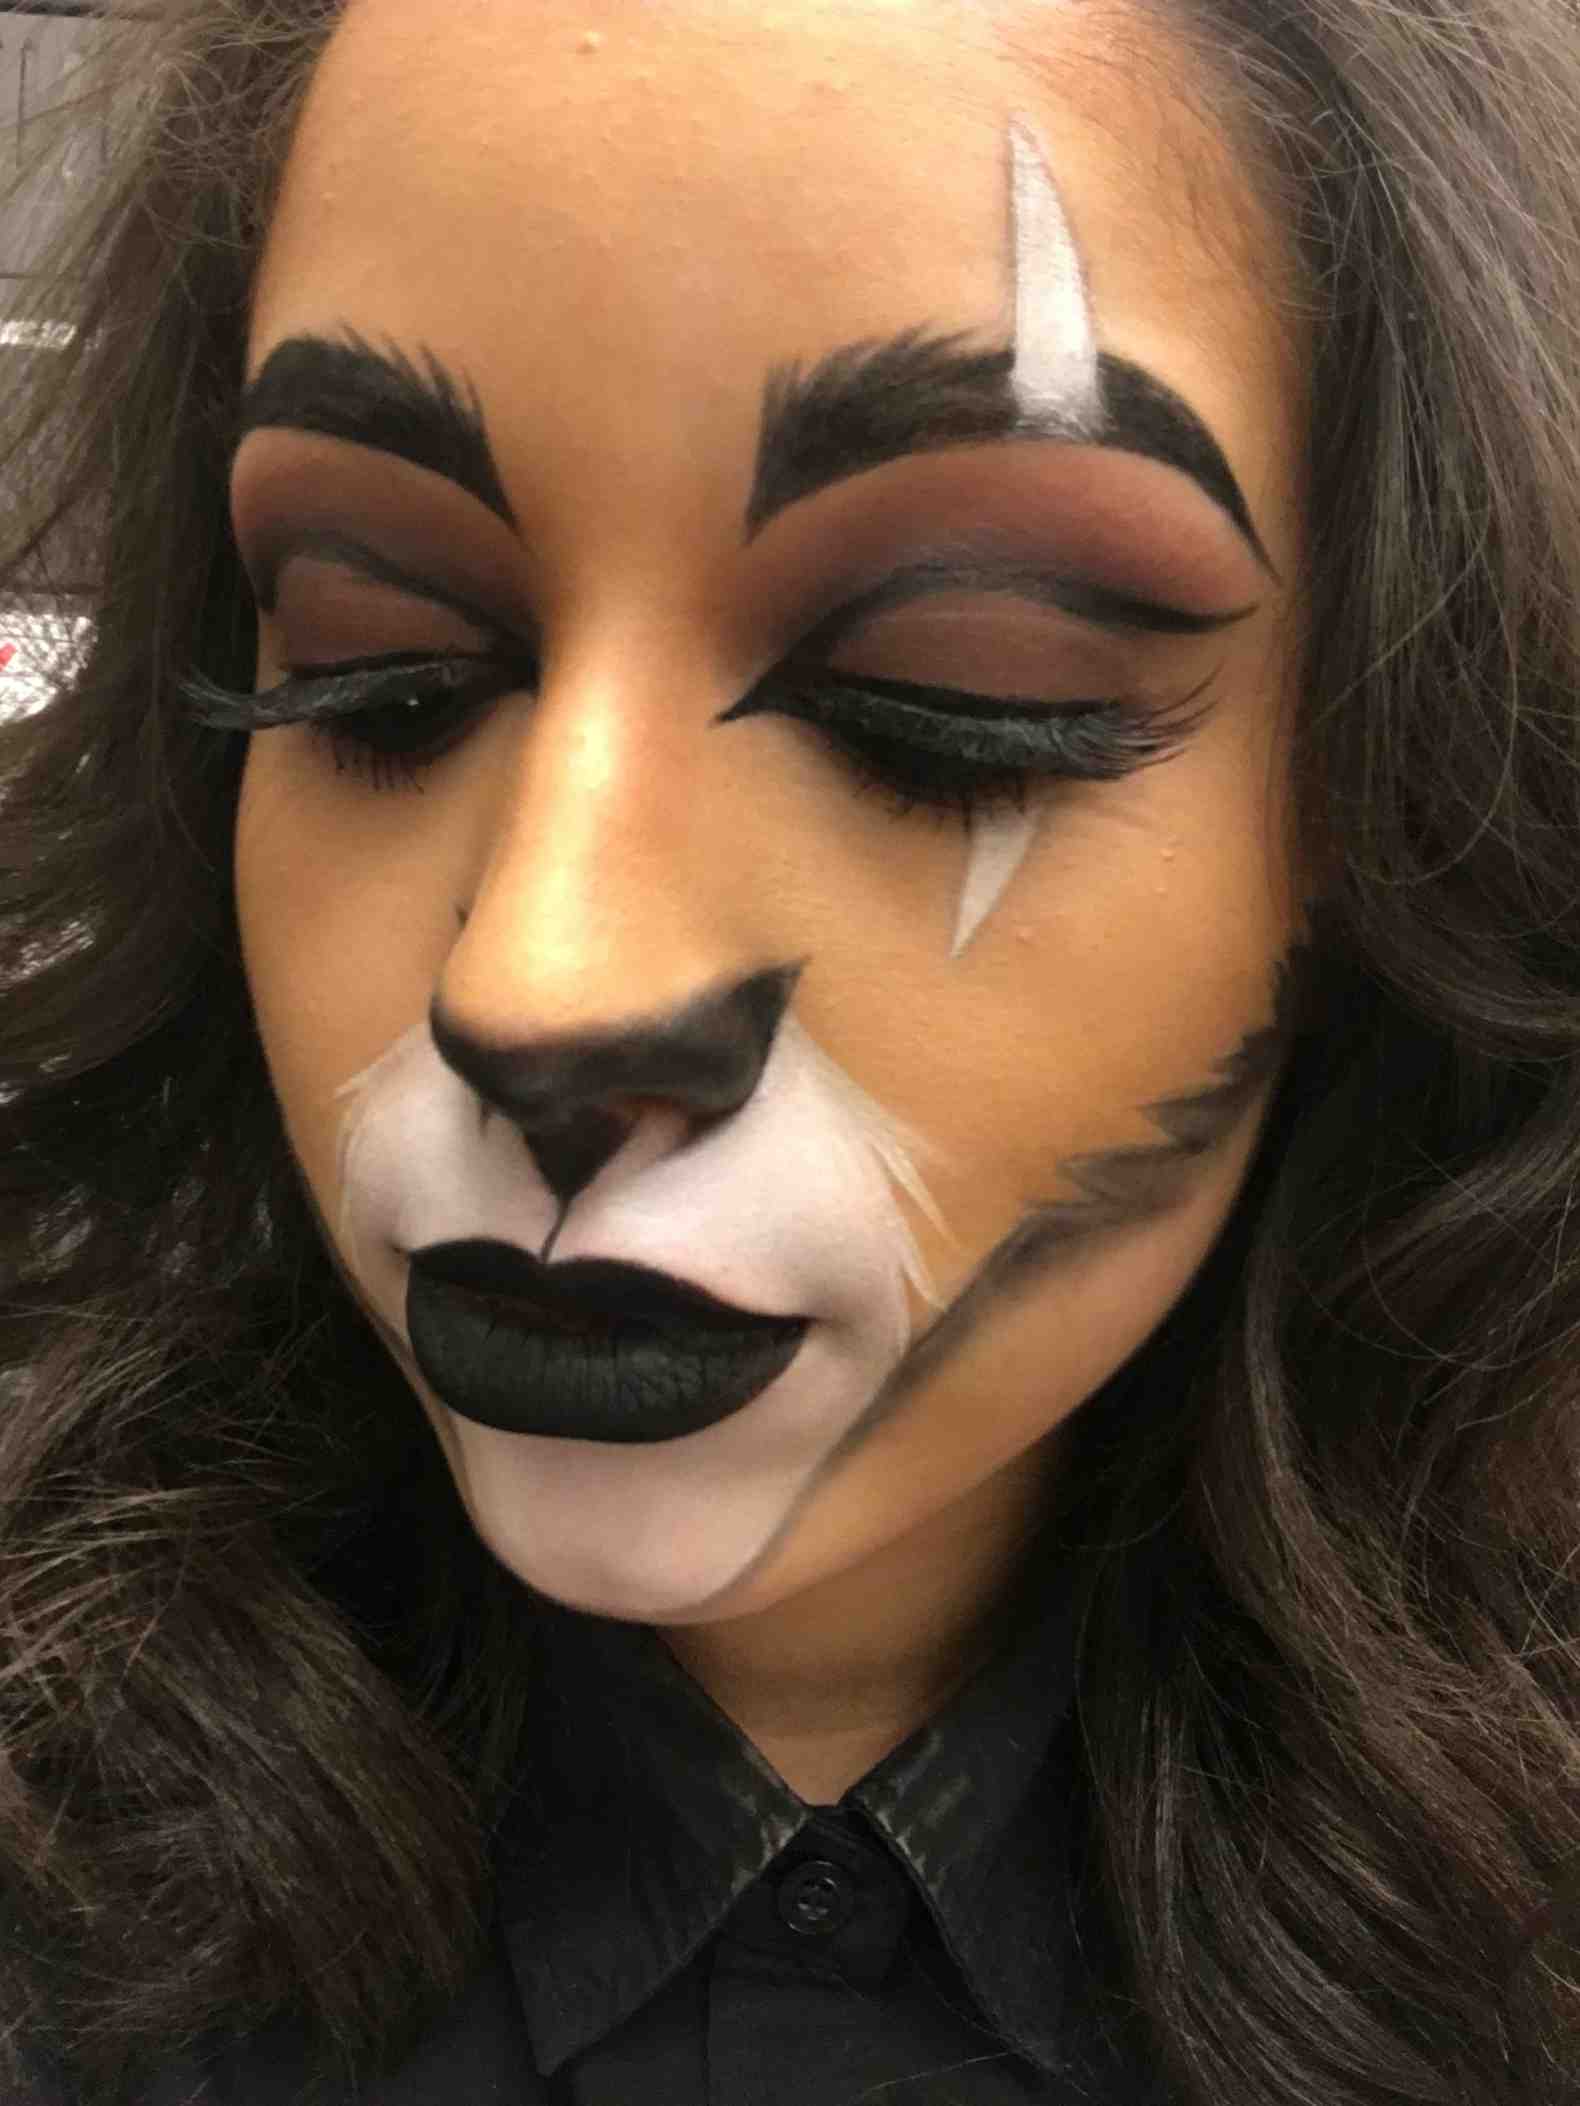 The Kingdom of the Lion Make-Up Ideas for Women Halloween Disney Costume Adult